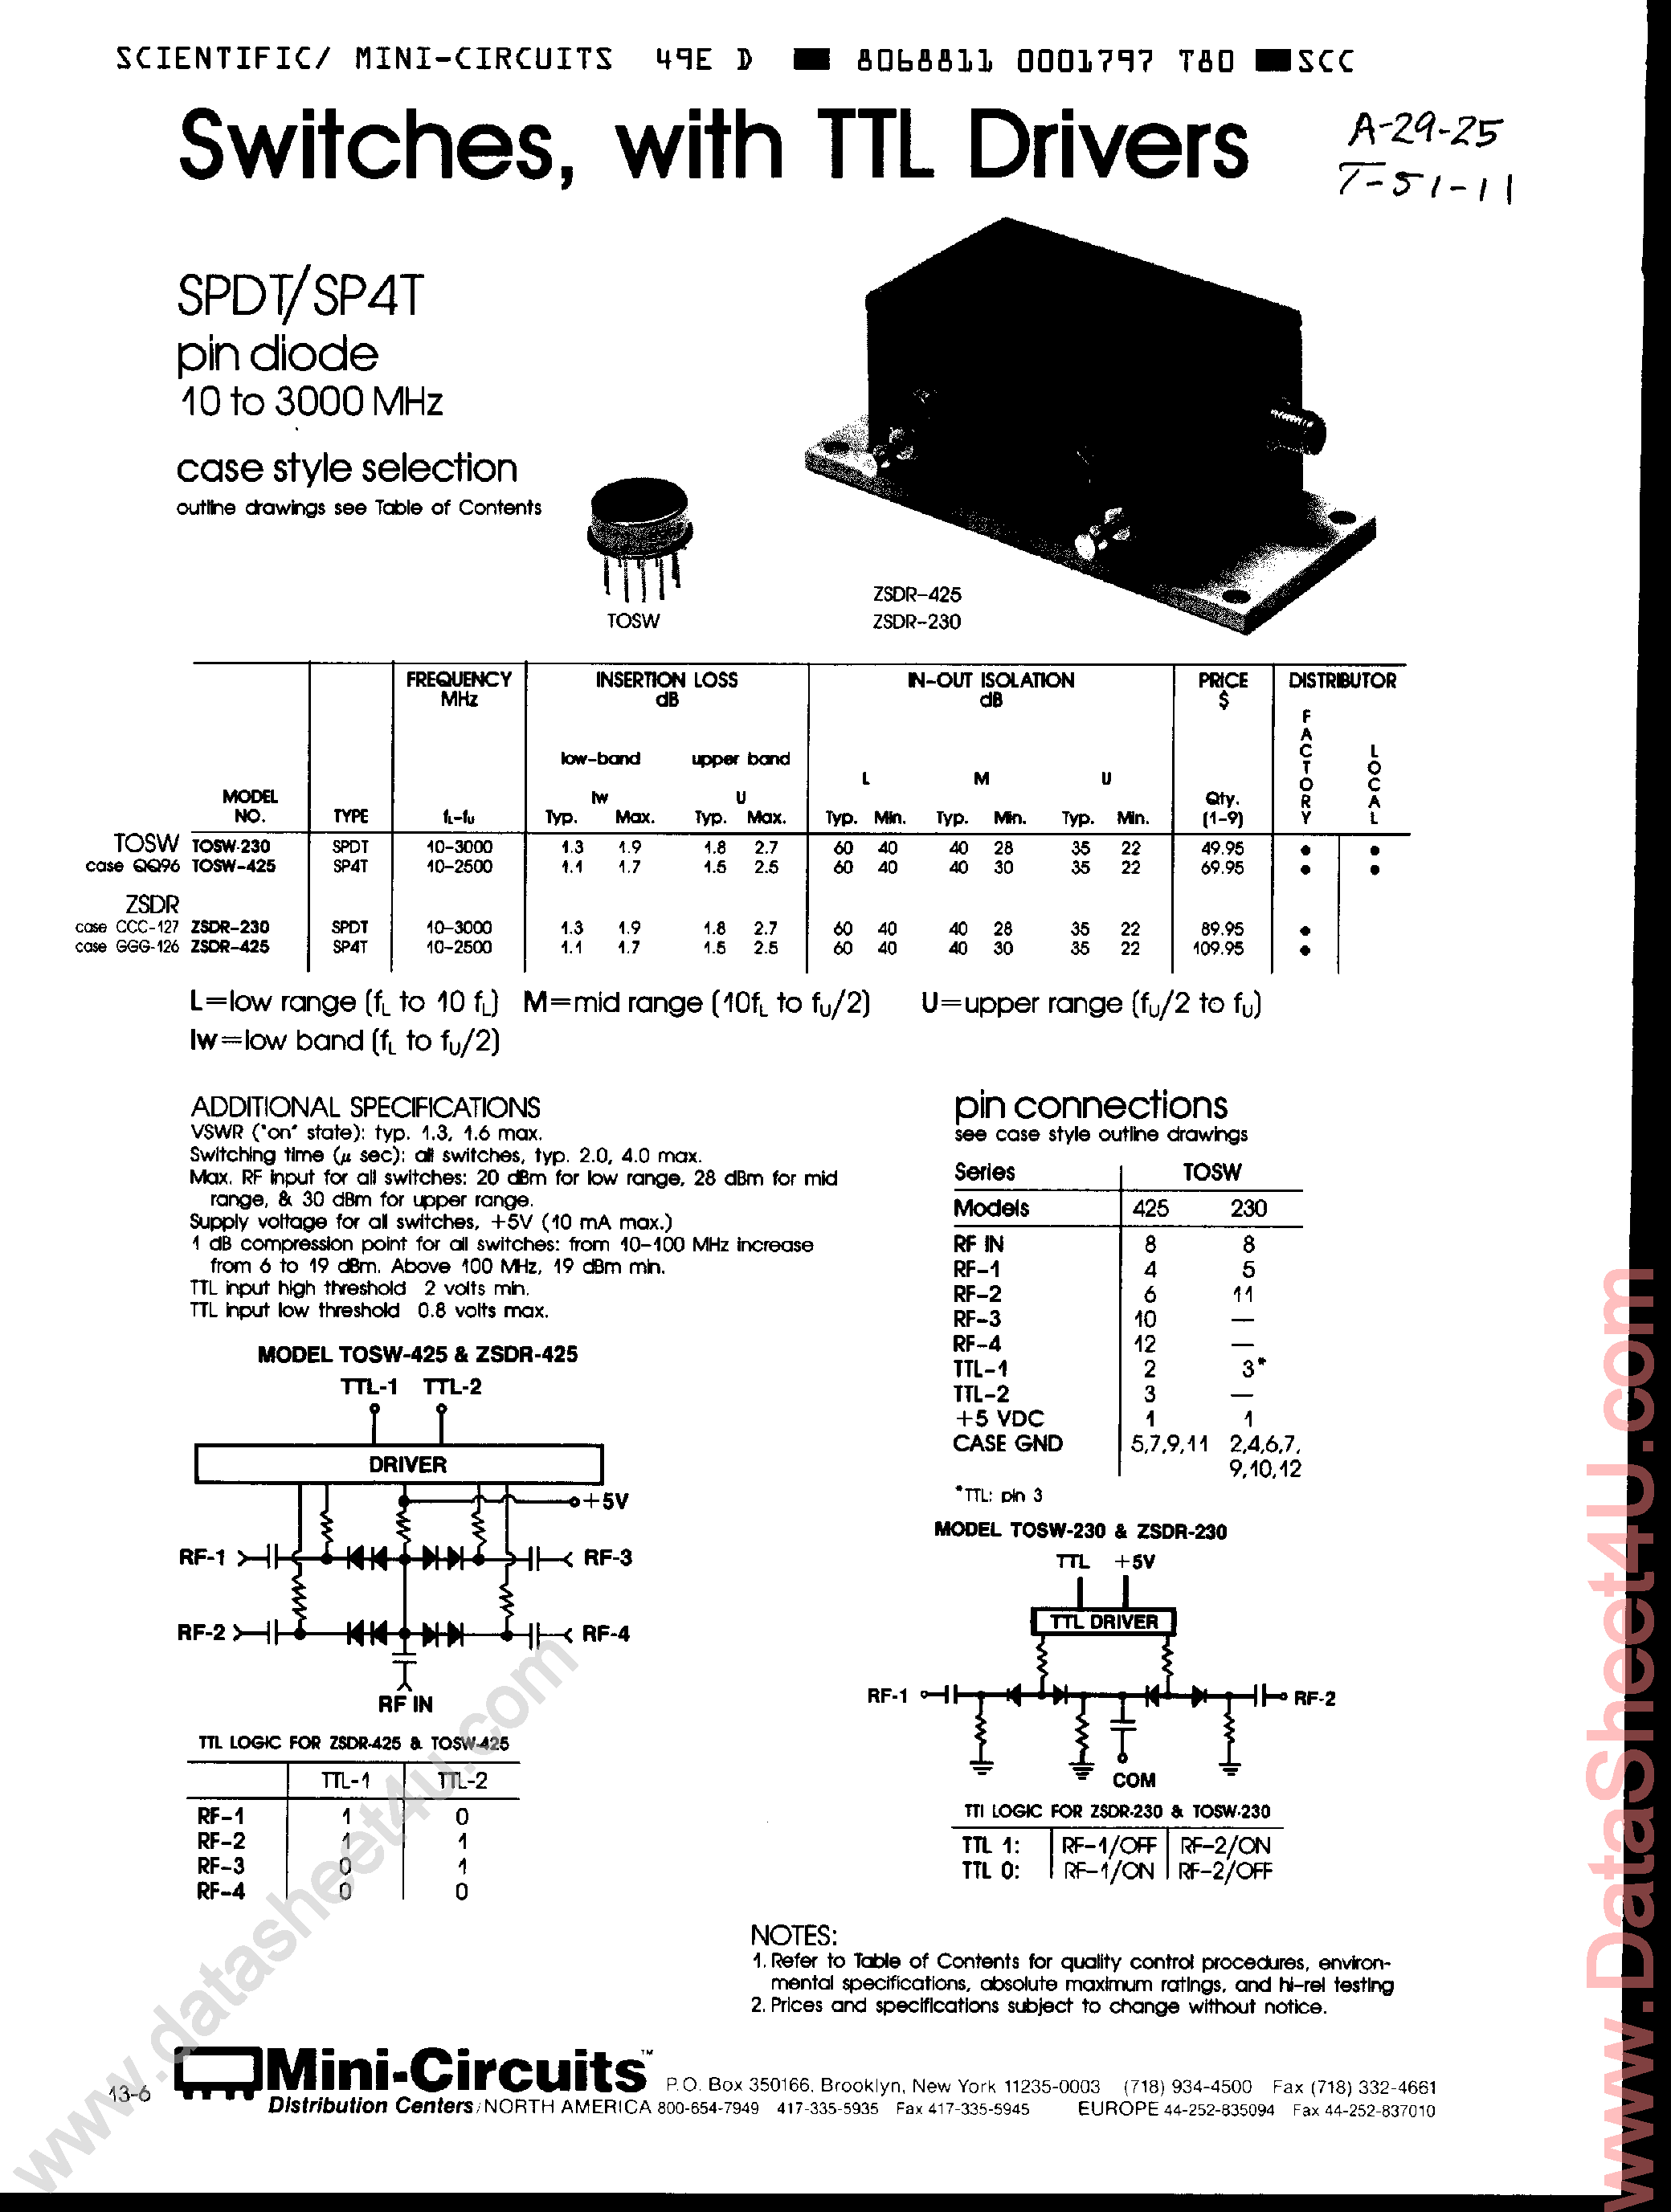 Datasheet TOSW-230 - (TOSW425 / TOSW230) Switches with TTL Drivers page 1